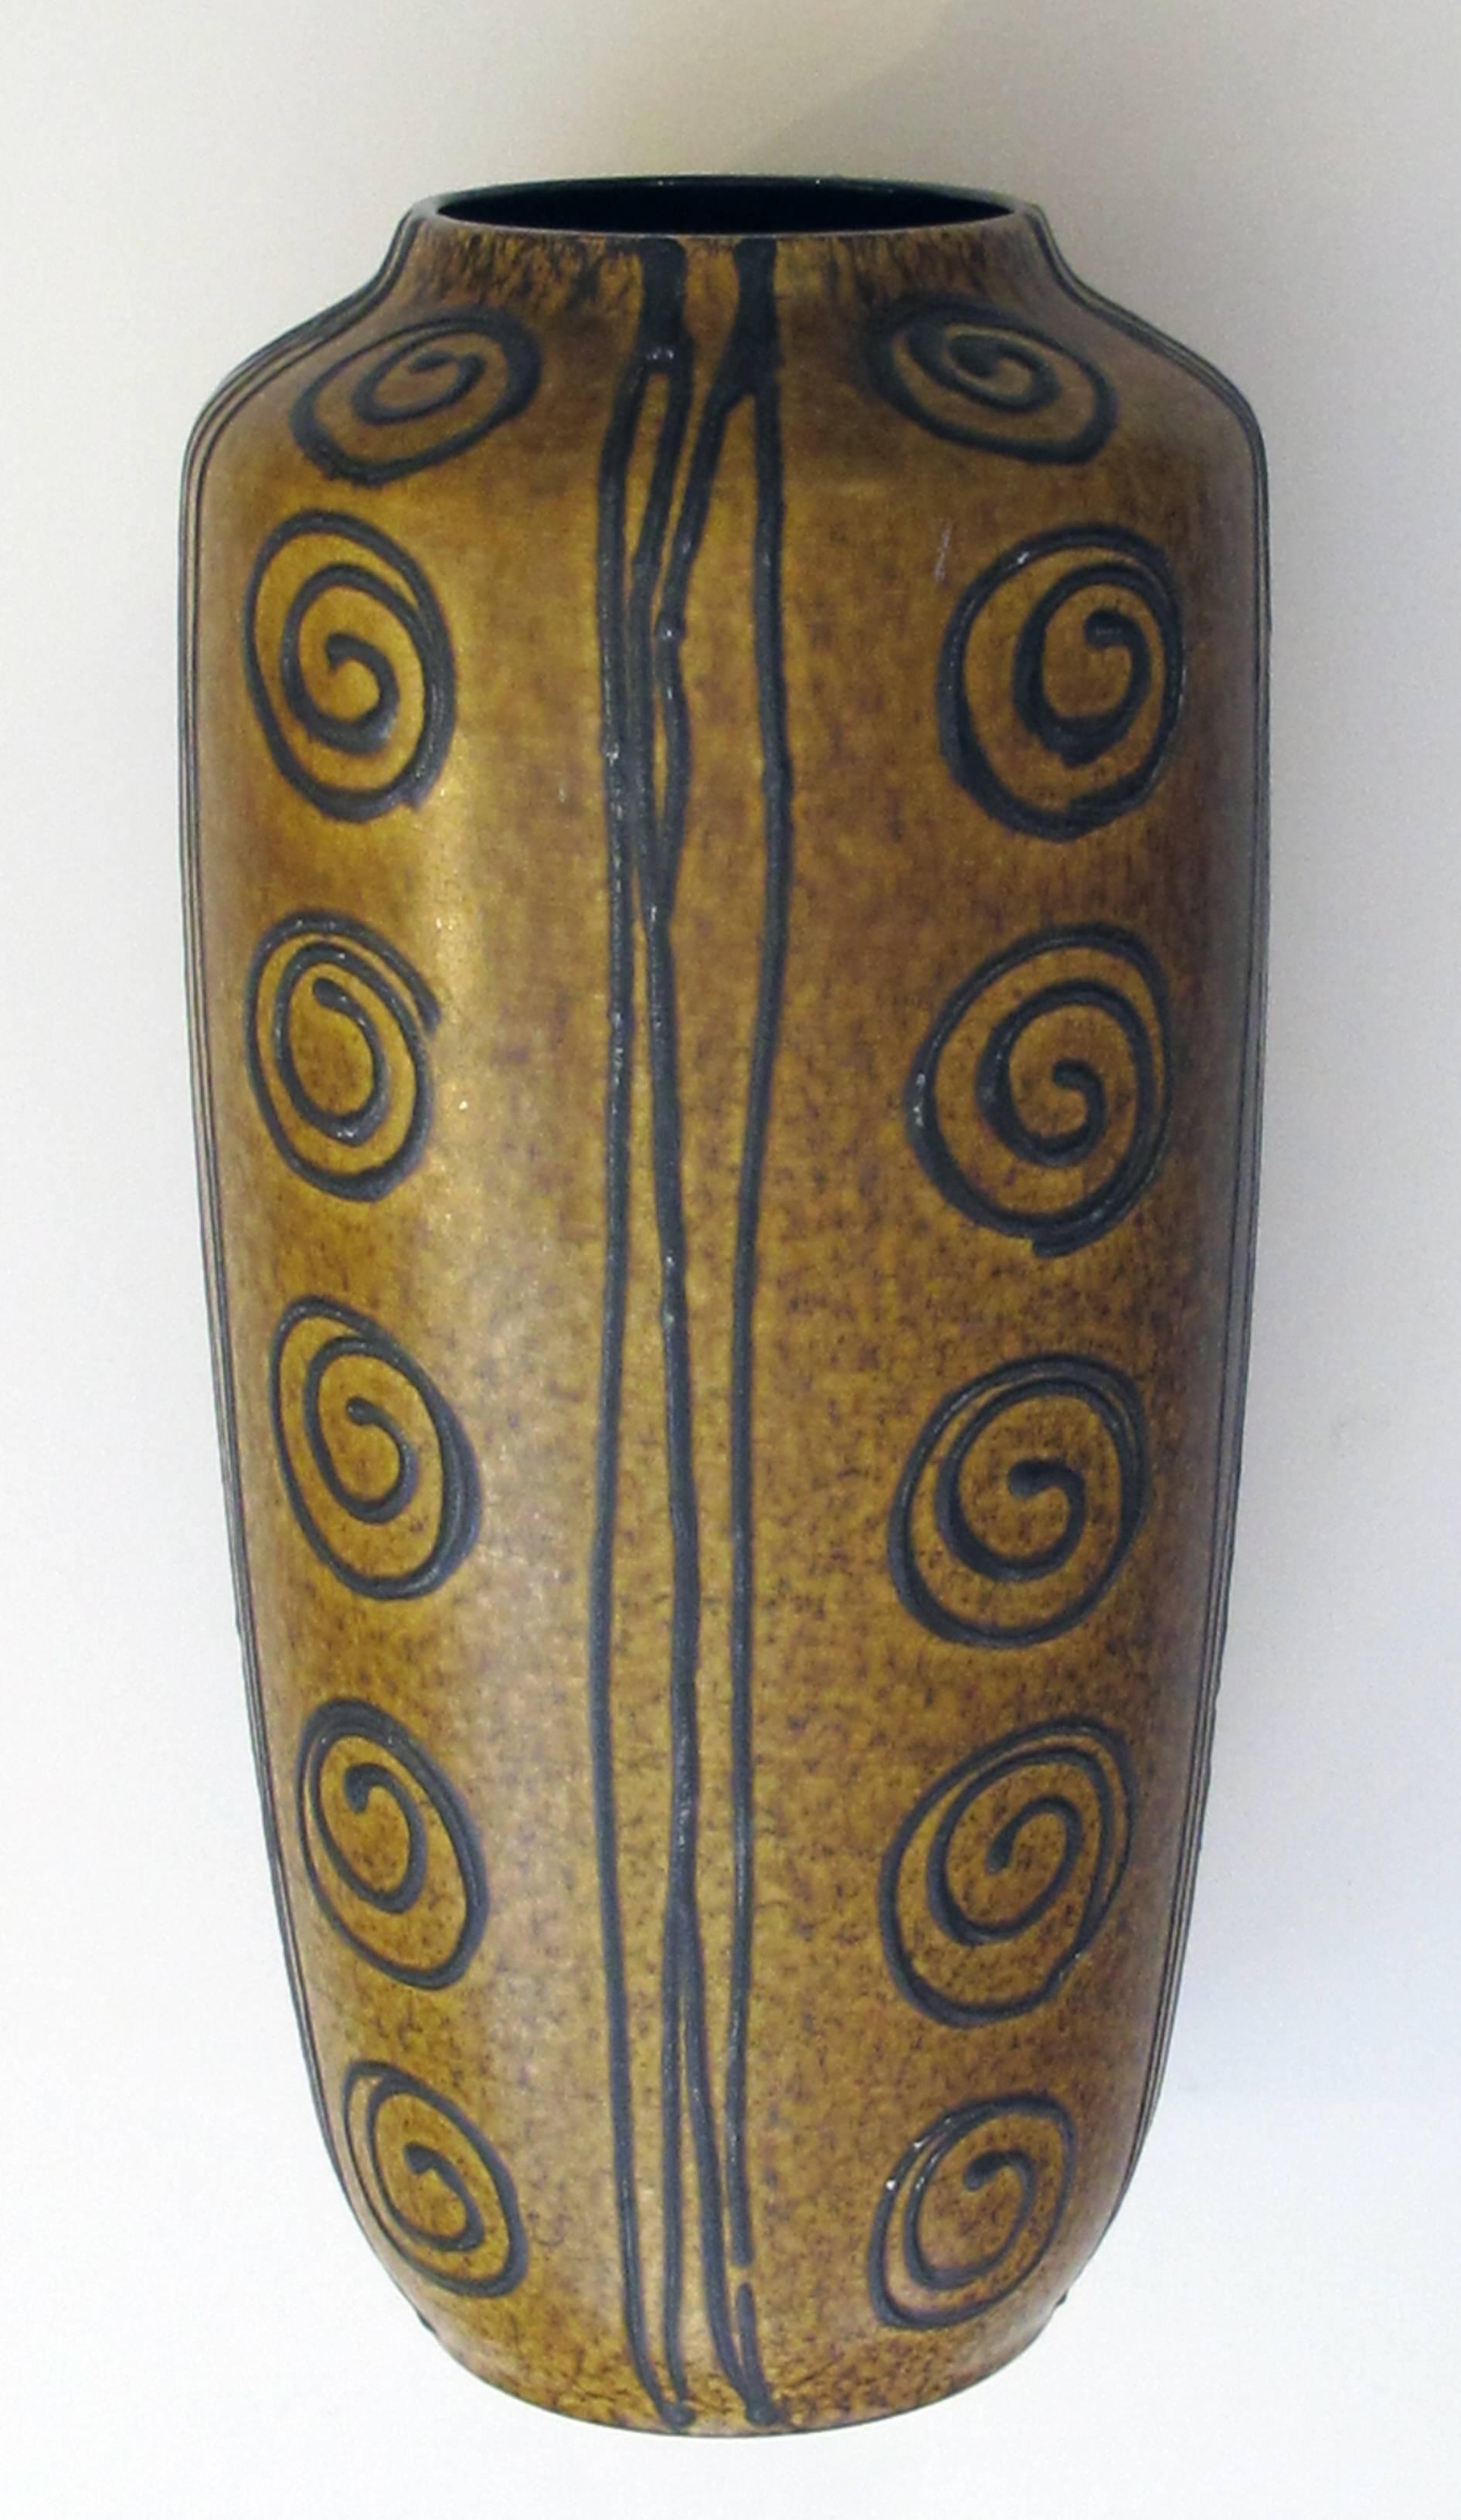 A tall and striking West German, 1960s ochre glaze vase with dark brown drip-glaze decoration; the tall tapering vase with everted mouth; adorned overall with dark brown drips and coiled spheres on an ochre ground; with raised maker's mark on